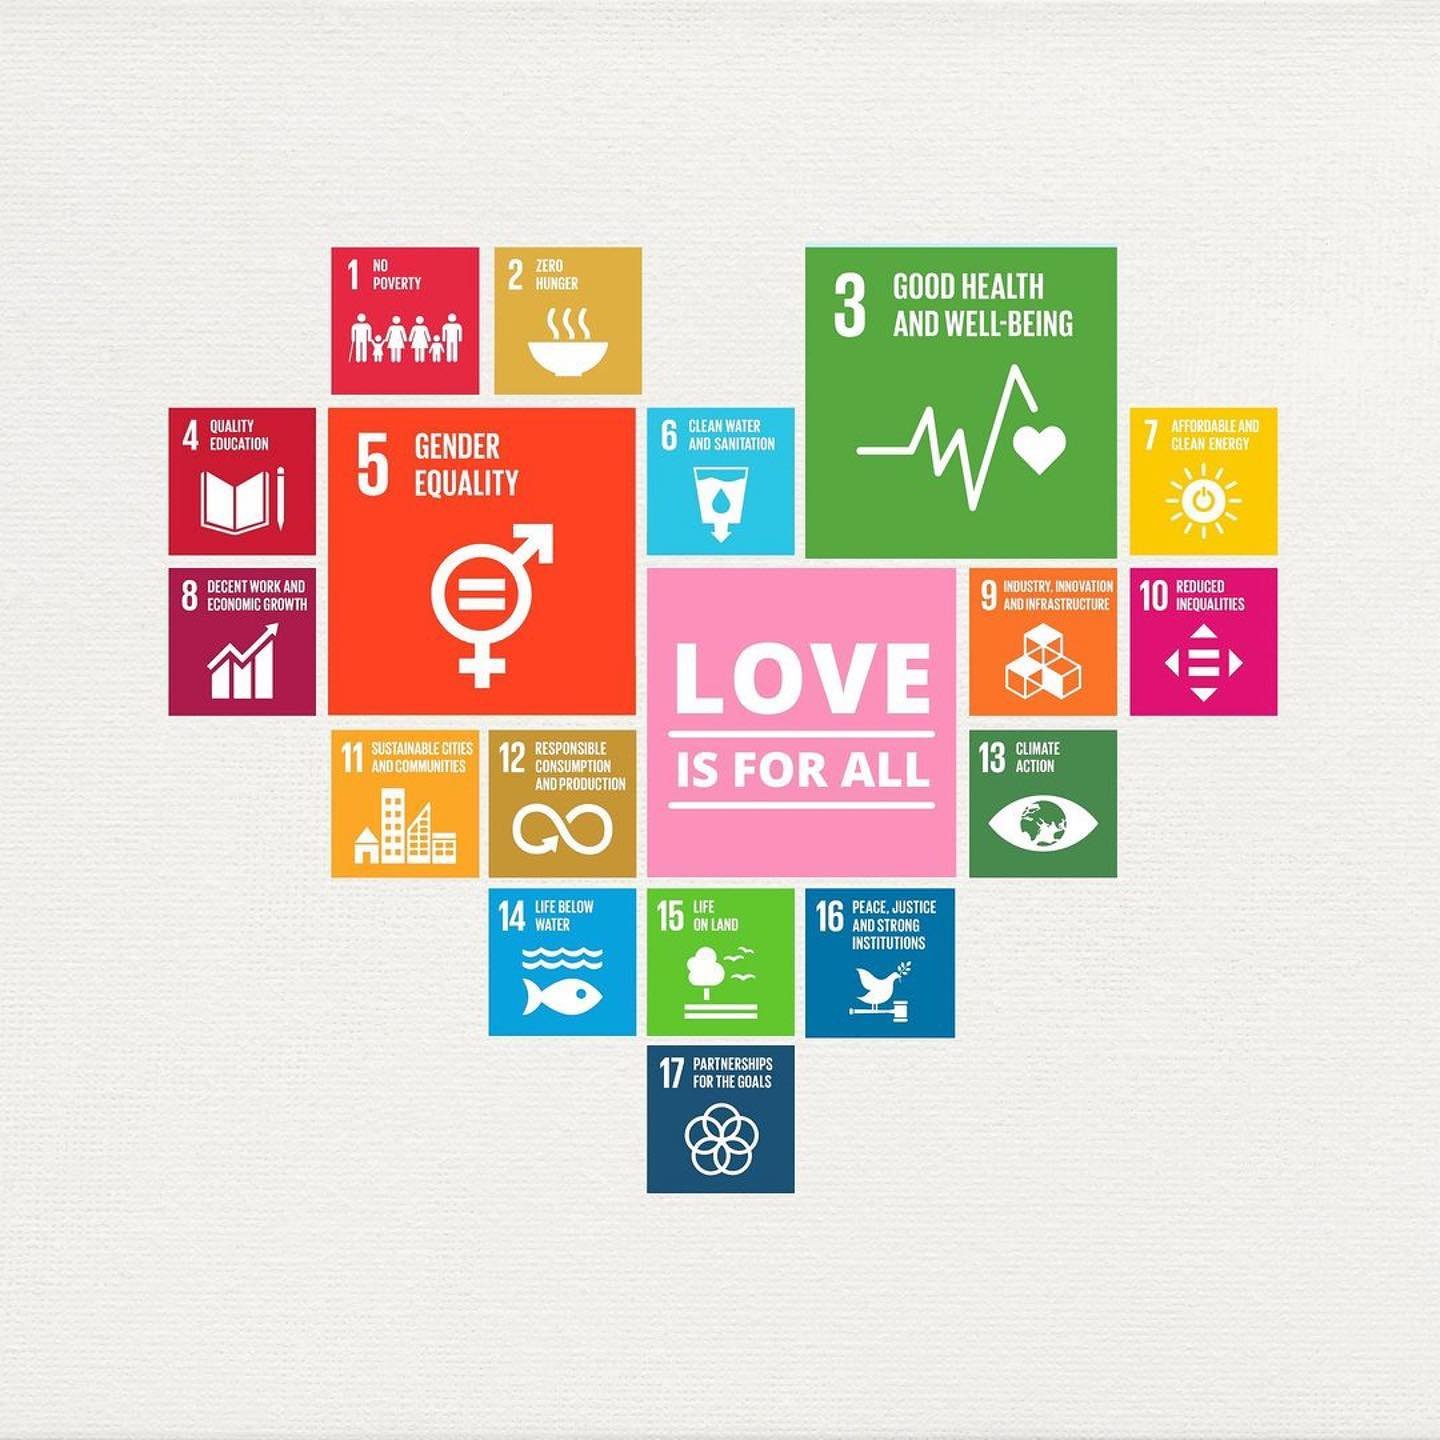 #Repost via @undp

We put the #GlobalGoals at the 💙 of all we do.

This #ValentinesDay and every day, let&rsquo;s make the Sustainable Development Goals a reality and leave no one behind. 

#HealingHearts #BuildingBonds 
#CertifiedLovers #GoodVibes2